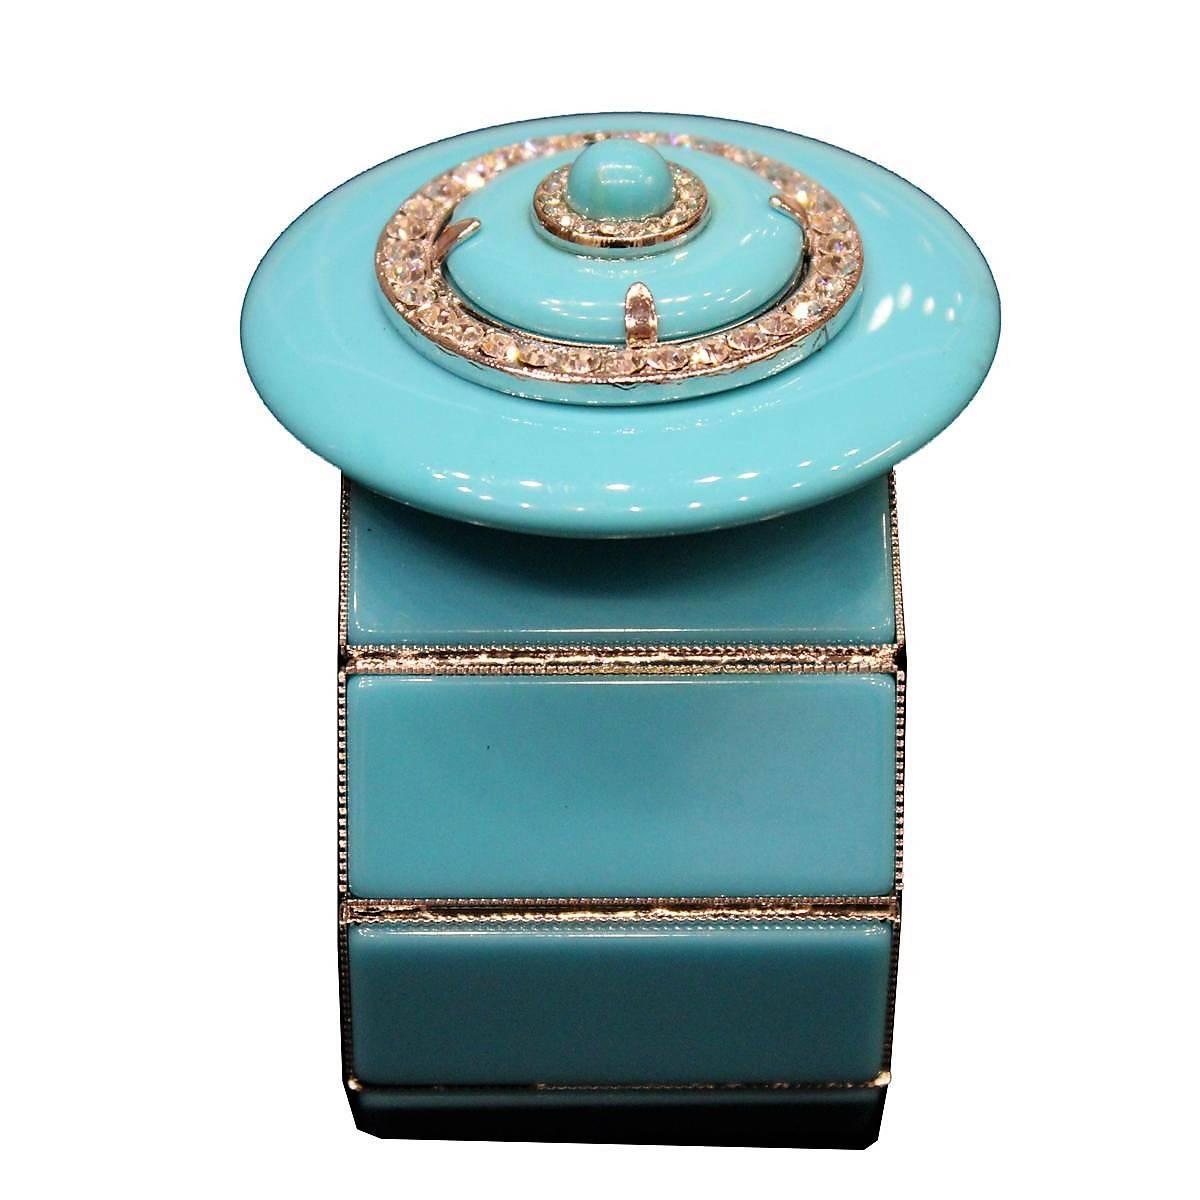 Fantastic Carlo Zini bijoux Milan bracelet
One of the world's best bijoux designers
Non allergenic rhodium
Amazing hand creation of crystals and colored resins
Turquoise color
Déco theme
Maximum width cm 4,5 (1.77 inches)
Wrist size cm 17 (6.7